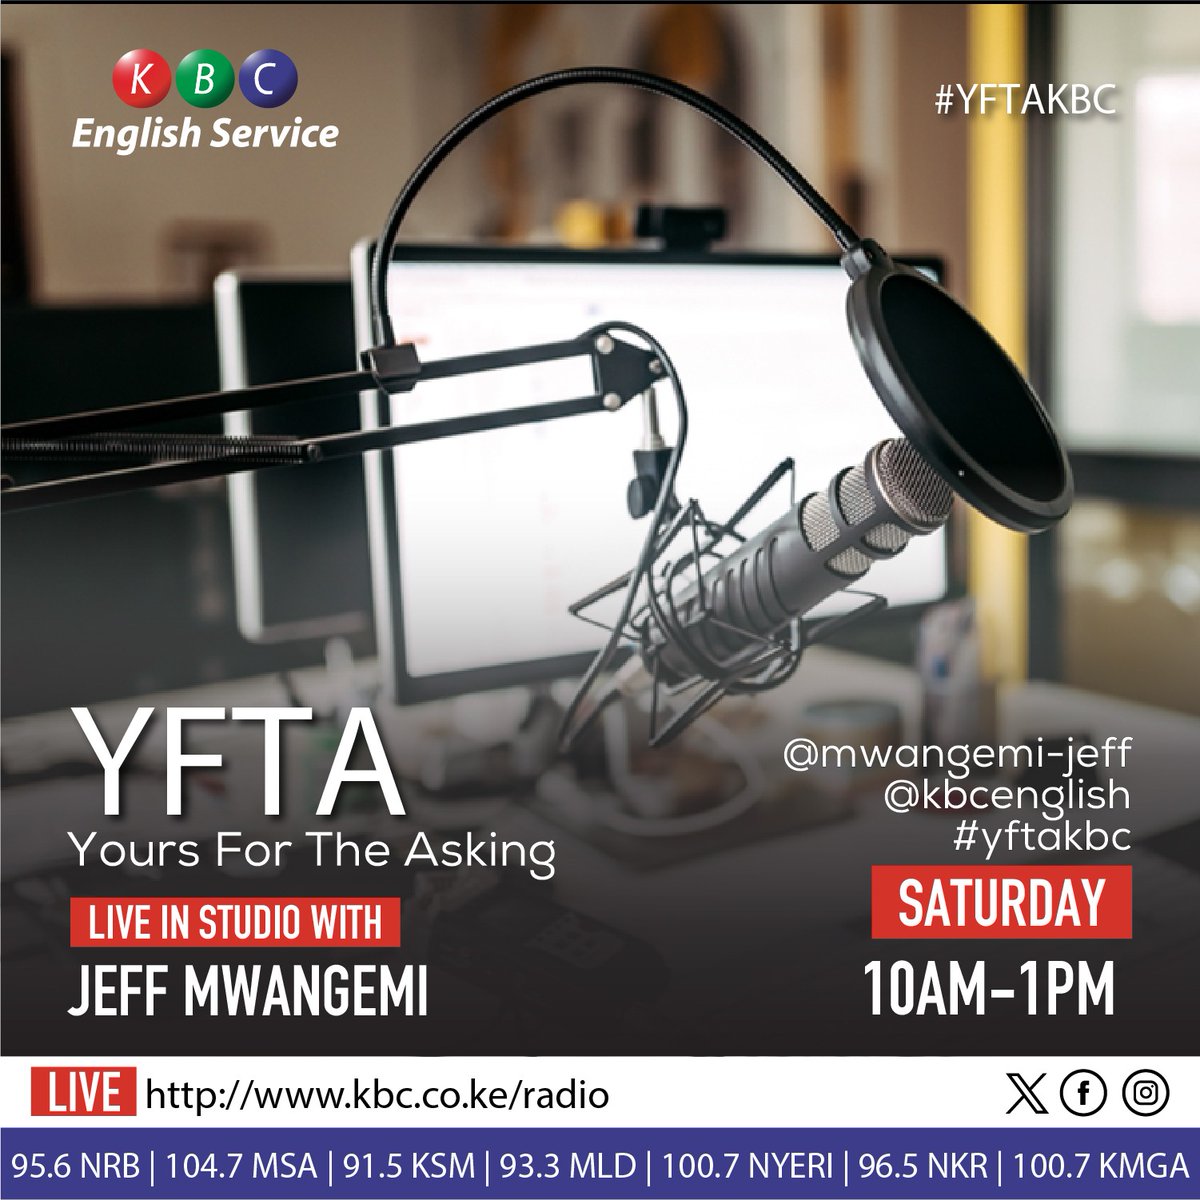 The Numero Uno Show. #yftakbc ..For Your Greetings to Family & Friends and Music request, from 10:00hrs ,...only on KBC English Service ....www.kbc.co.ke/radio ..... Get on Board via The Handle @mwangemi_jeff or @kbcenglish #yftakbc